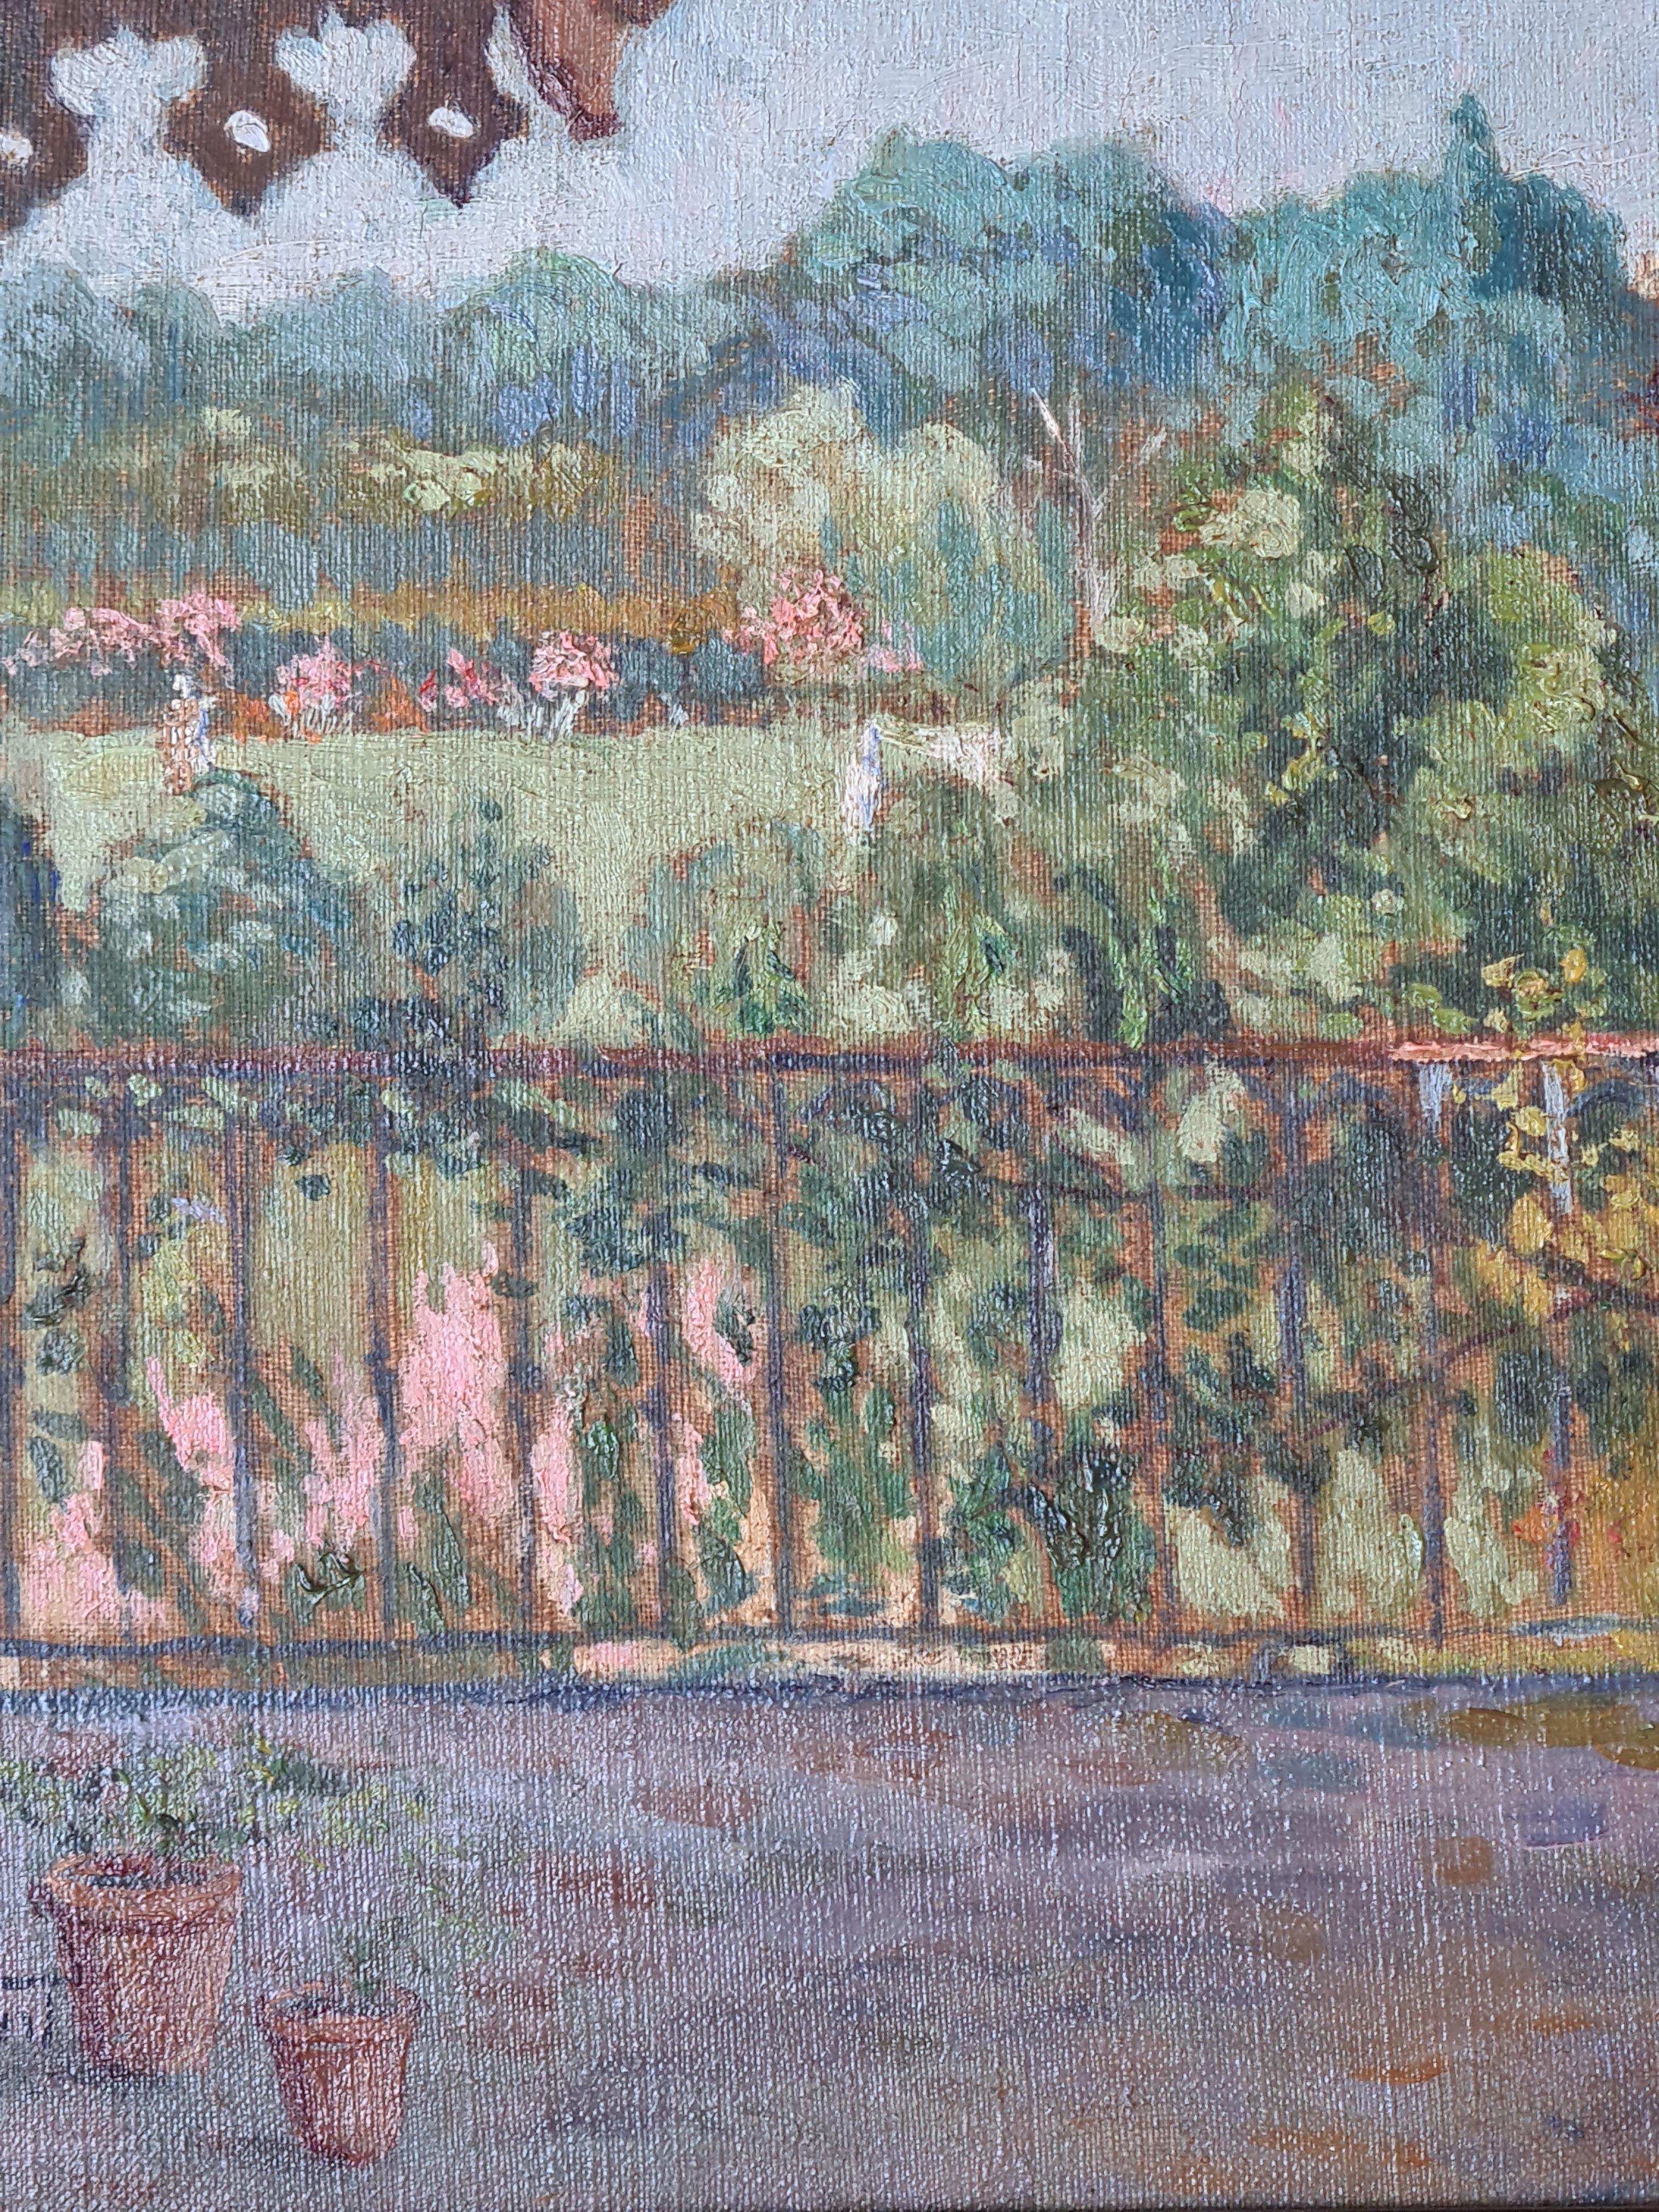 View From the Terrace, Château de Carlevan French Impressionist Garden Landscape For Sale 3